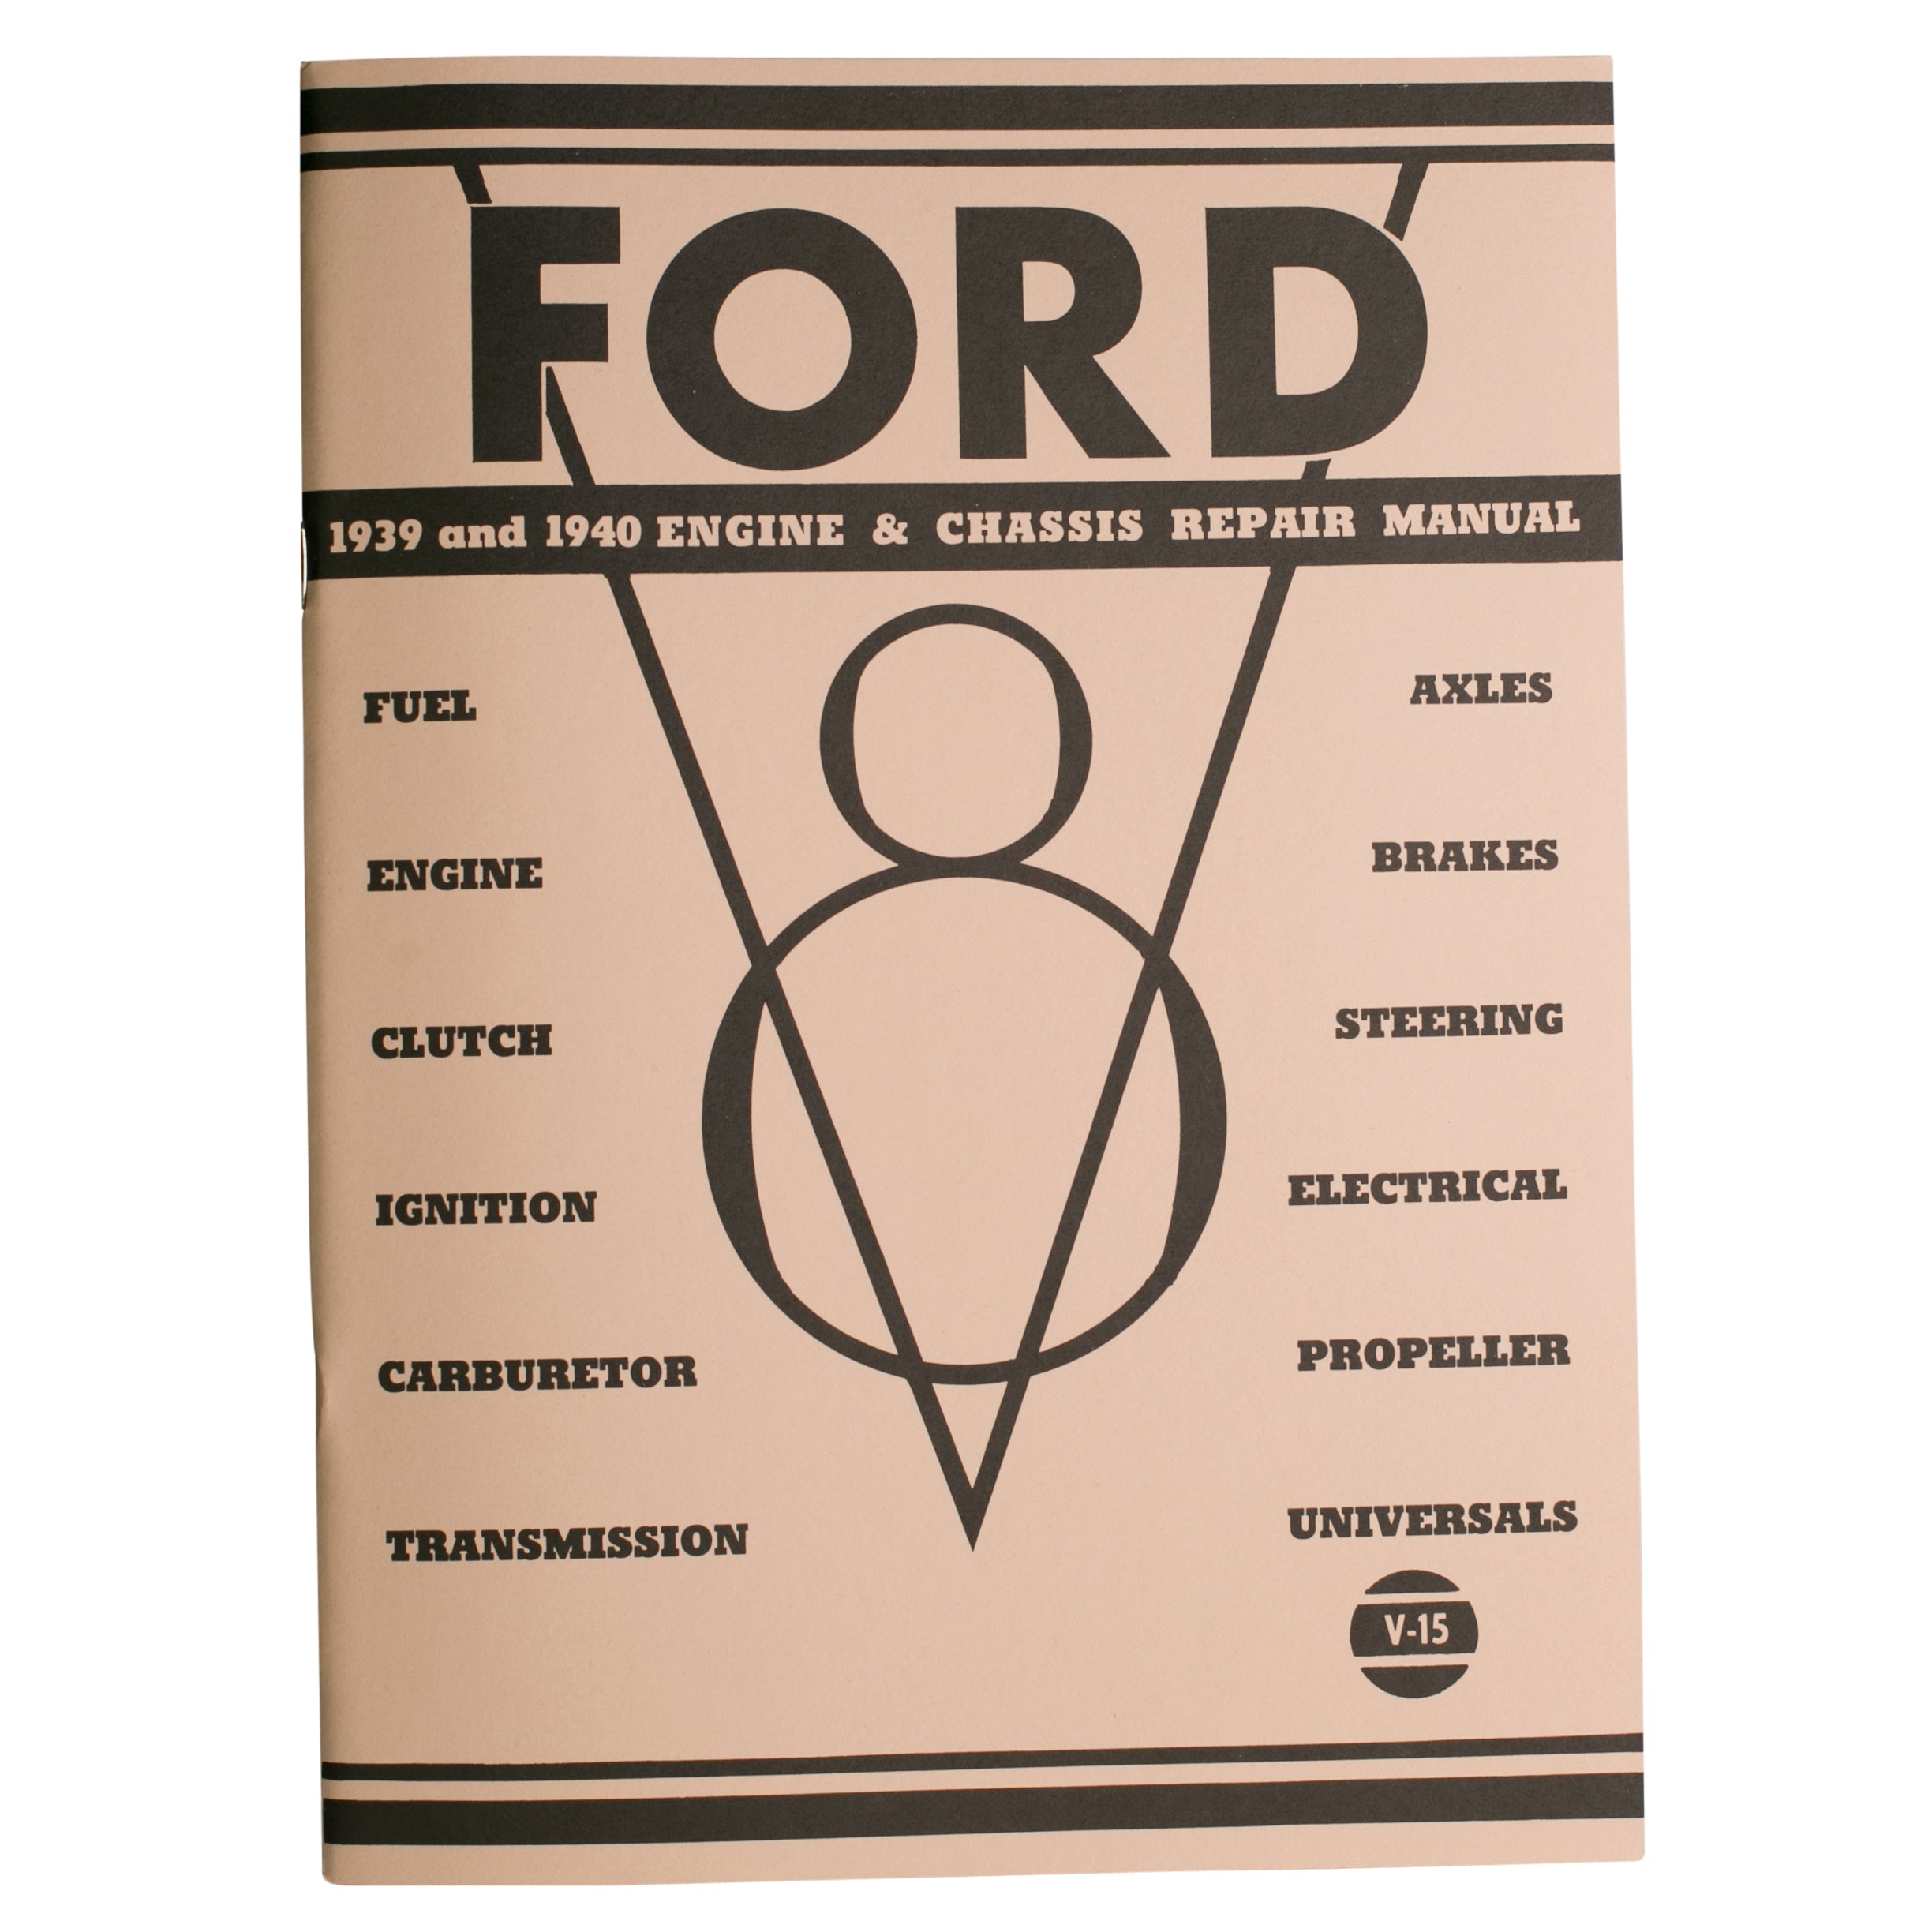 V-8 Engine & Chassis Repair Manual • 1939-40 Ford